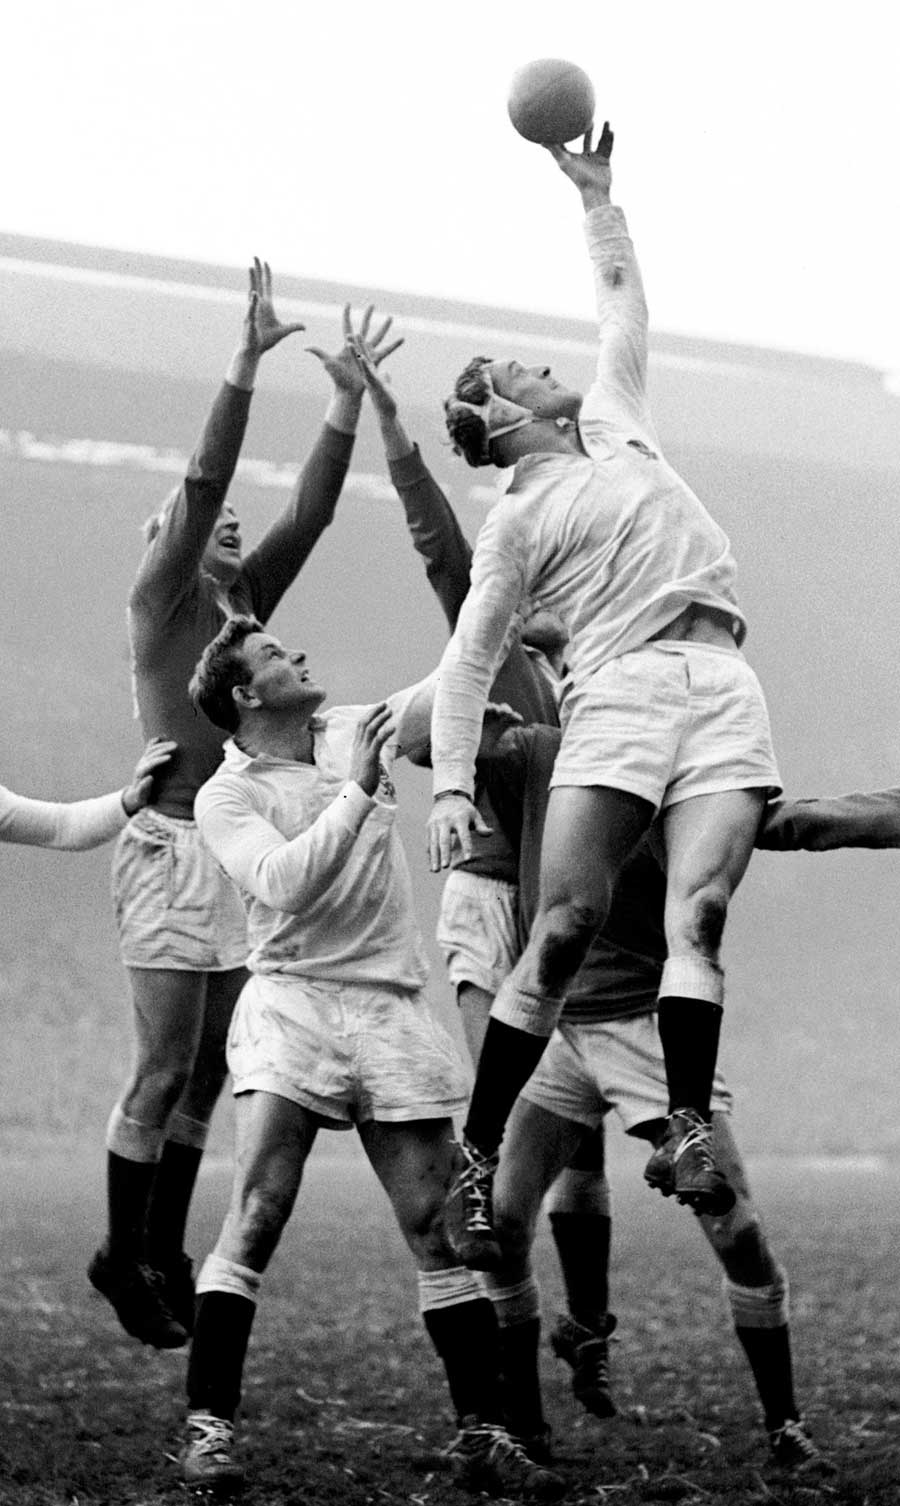 England's David Marques claims a lineout